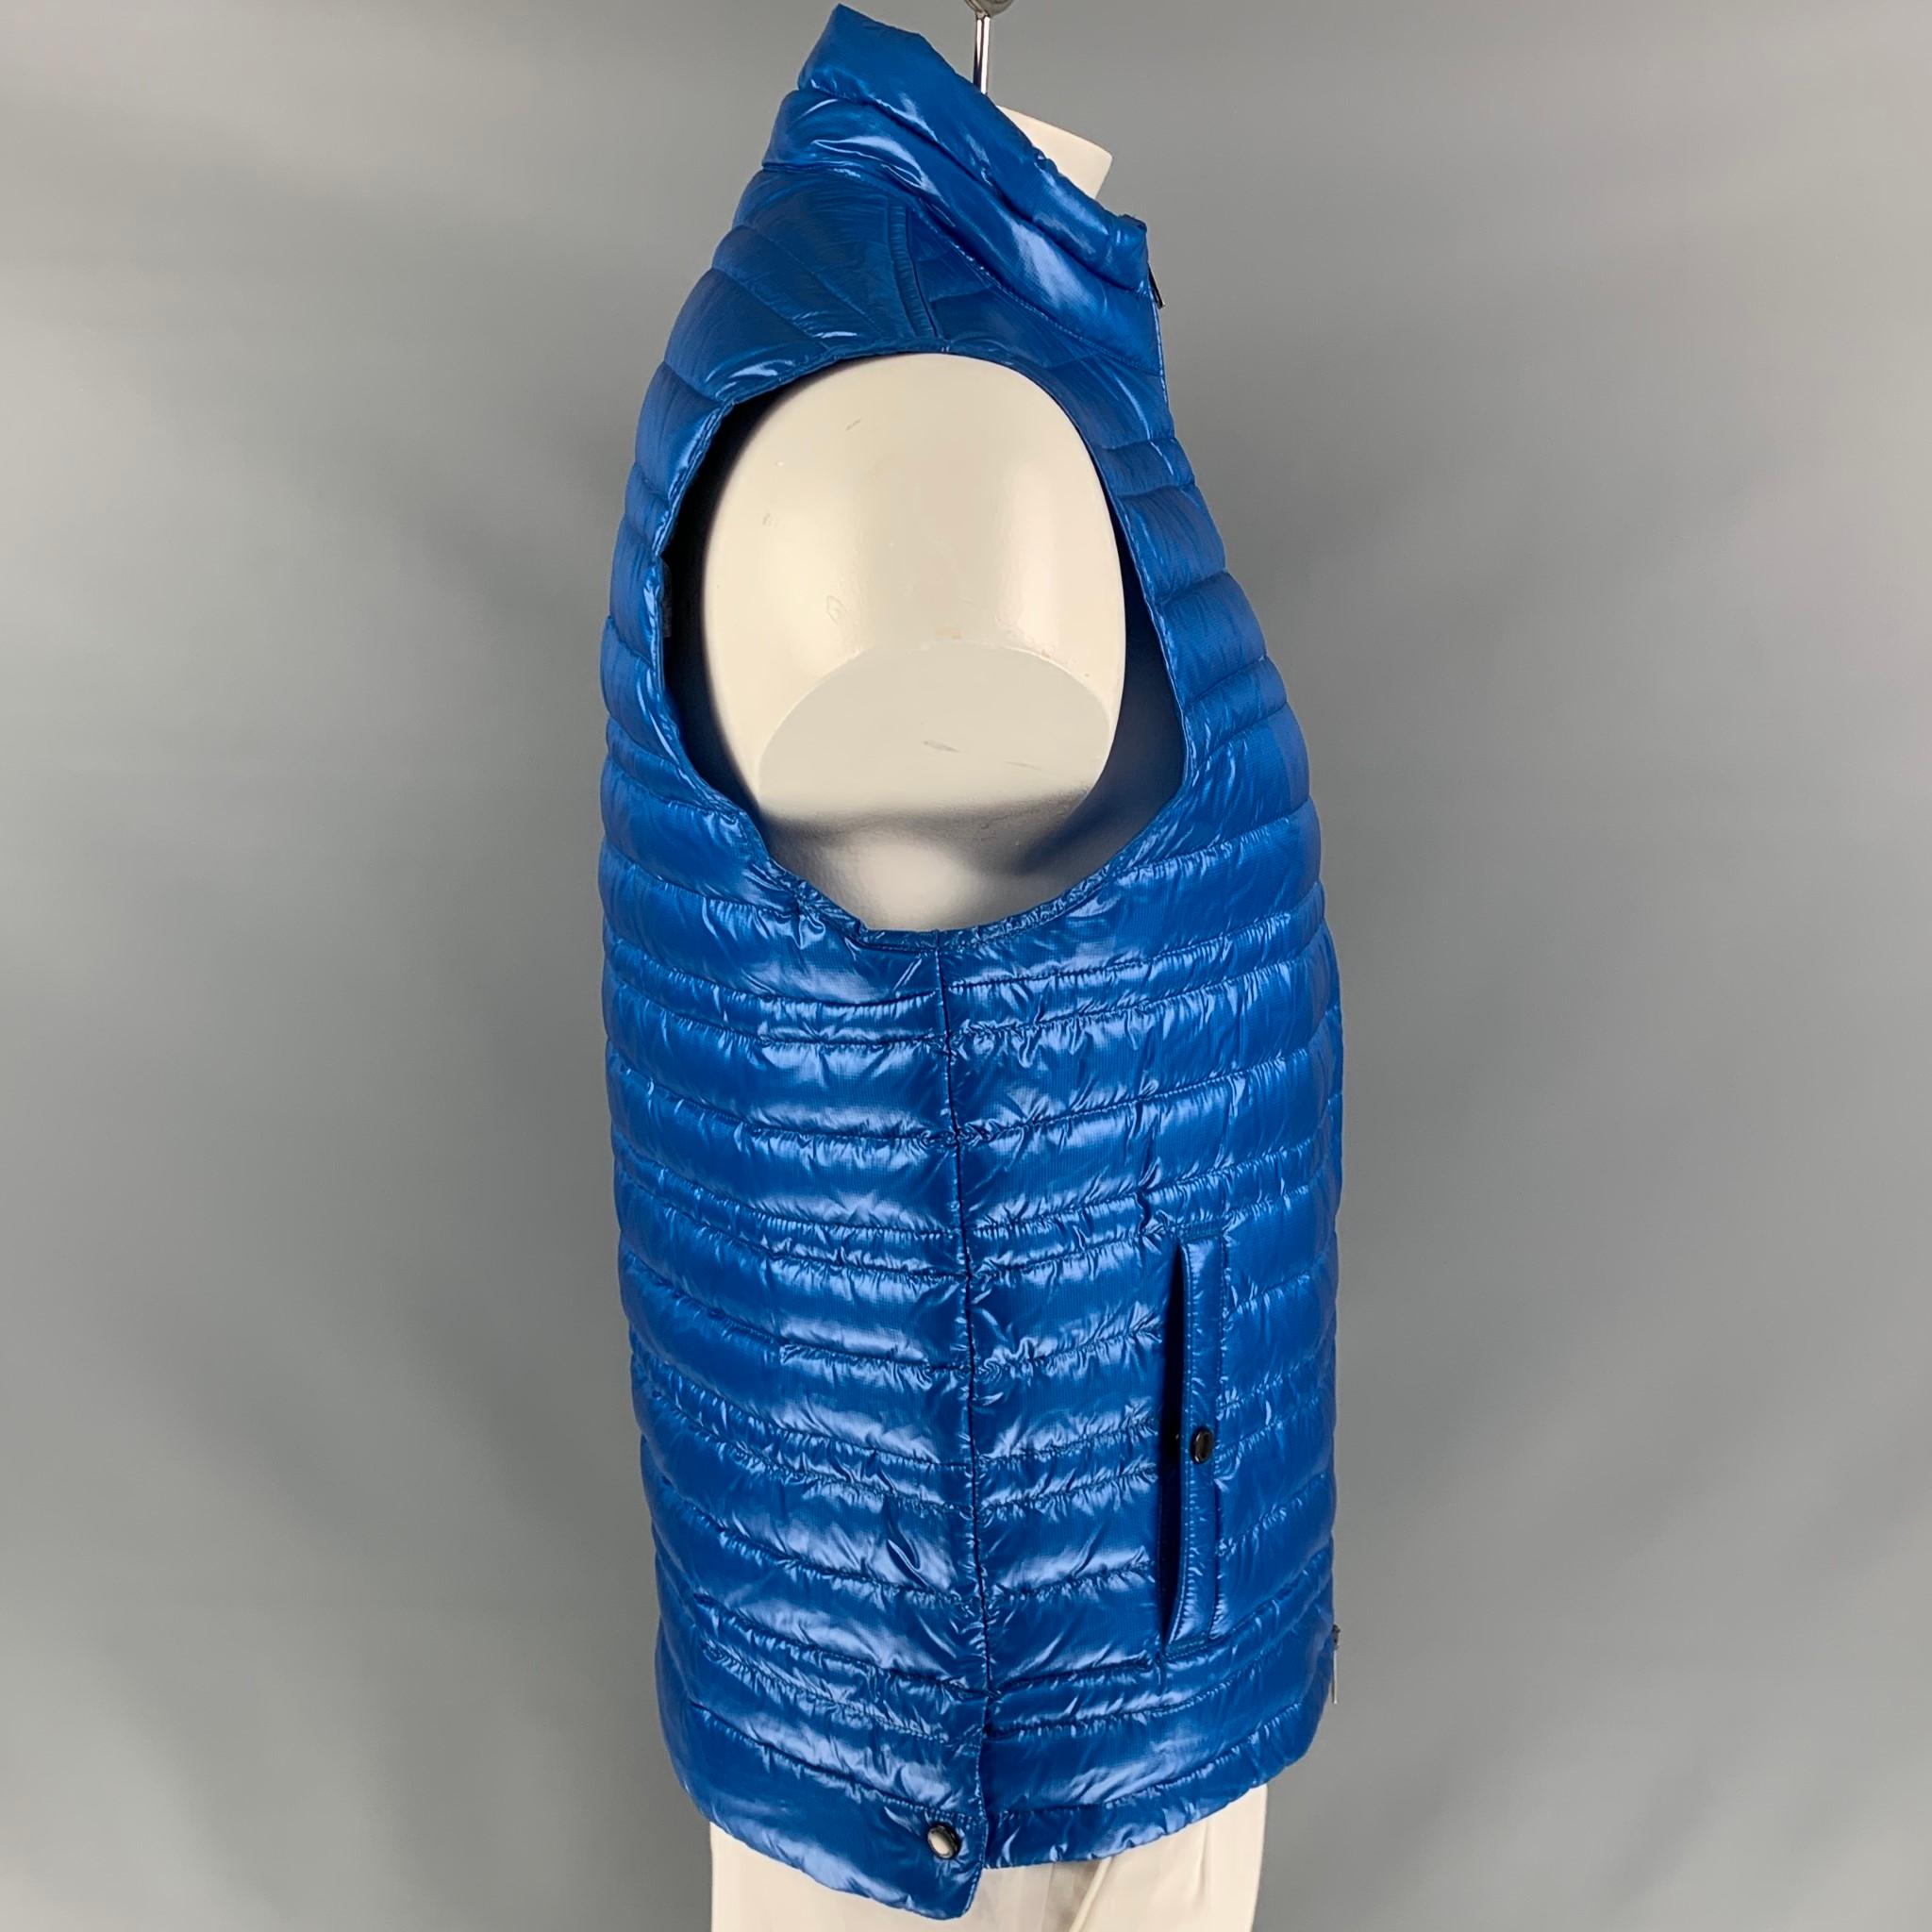 BURBERRY PRORSUM vest comes in a blue quilted polyamide featuring front pockets and a full zip up closure. 

Very Good Pre-Owned Condition.
Marked: L
Original Retail Price: $595.00

Measurements:

Shoulder: 18 in.
Chest: 42 in.
Length: 27 in. 